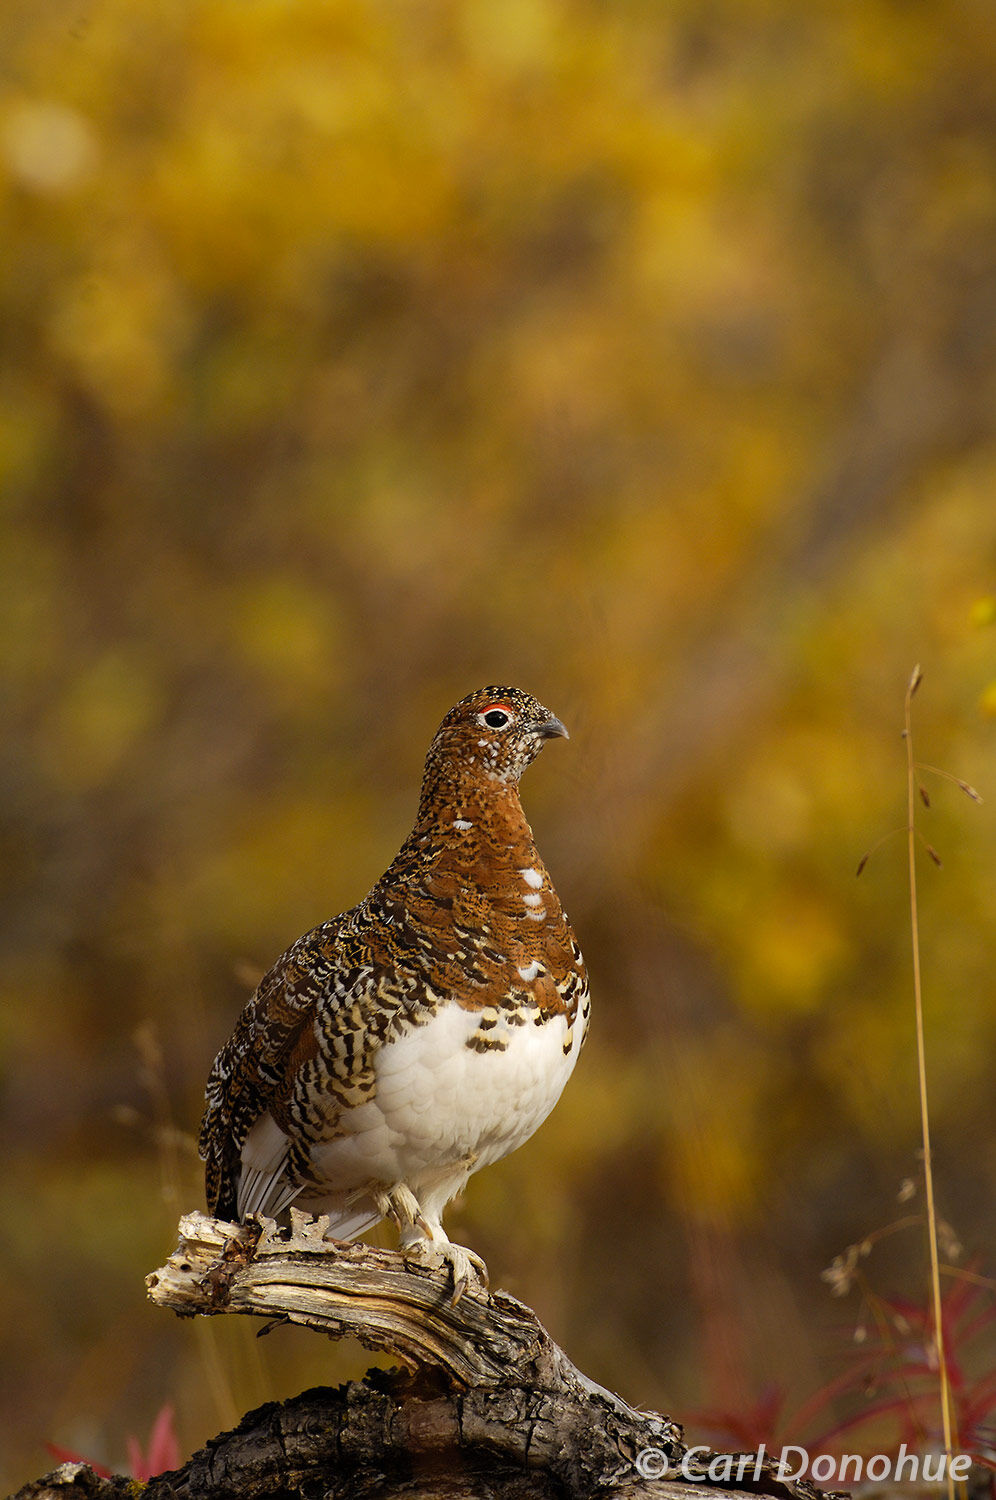 The willow Ptarmigan is Alaska's state bird, and very common throughout much of the state.  This female, photographed here against...